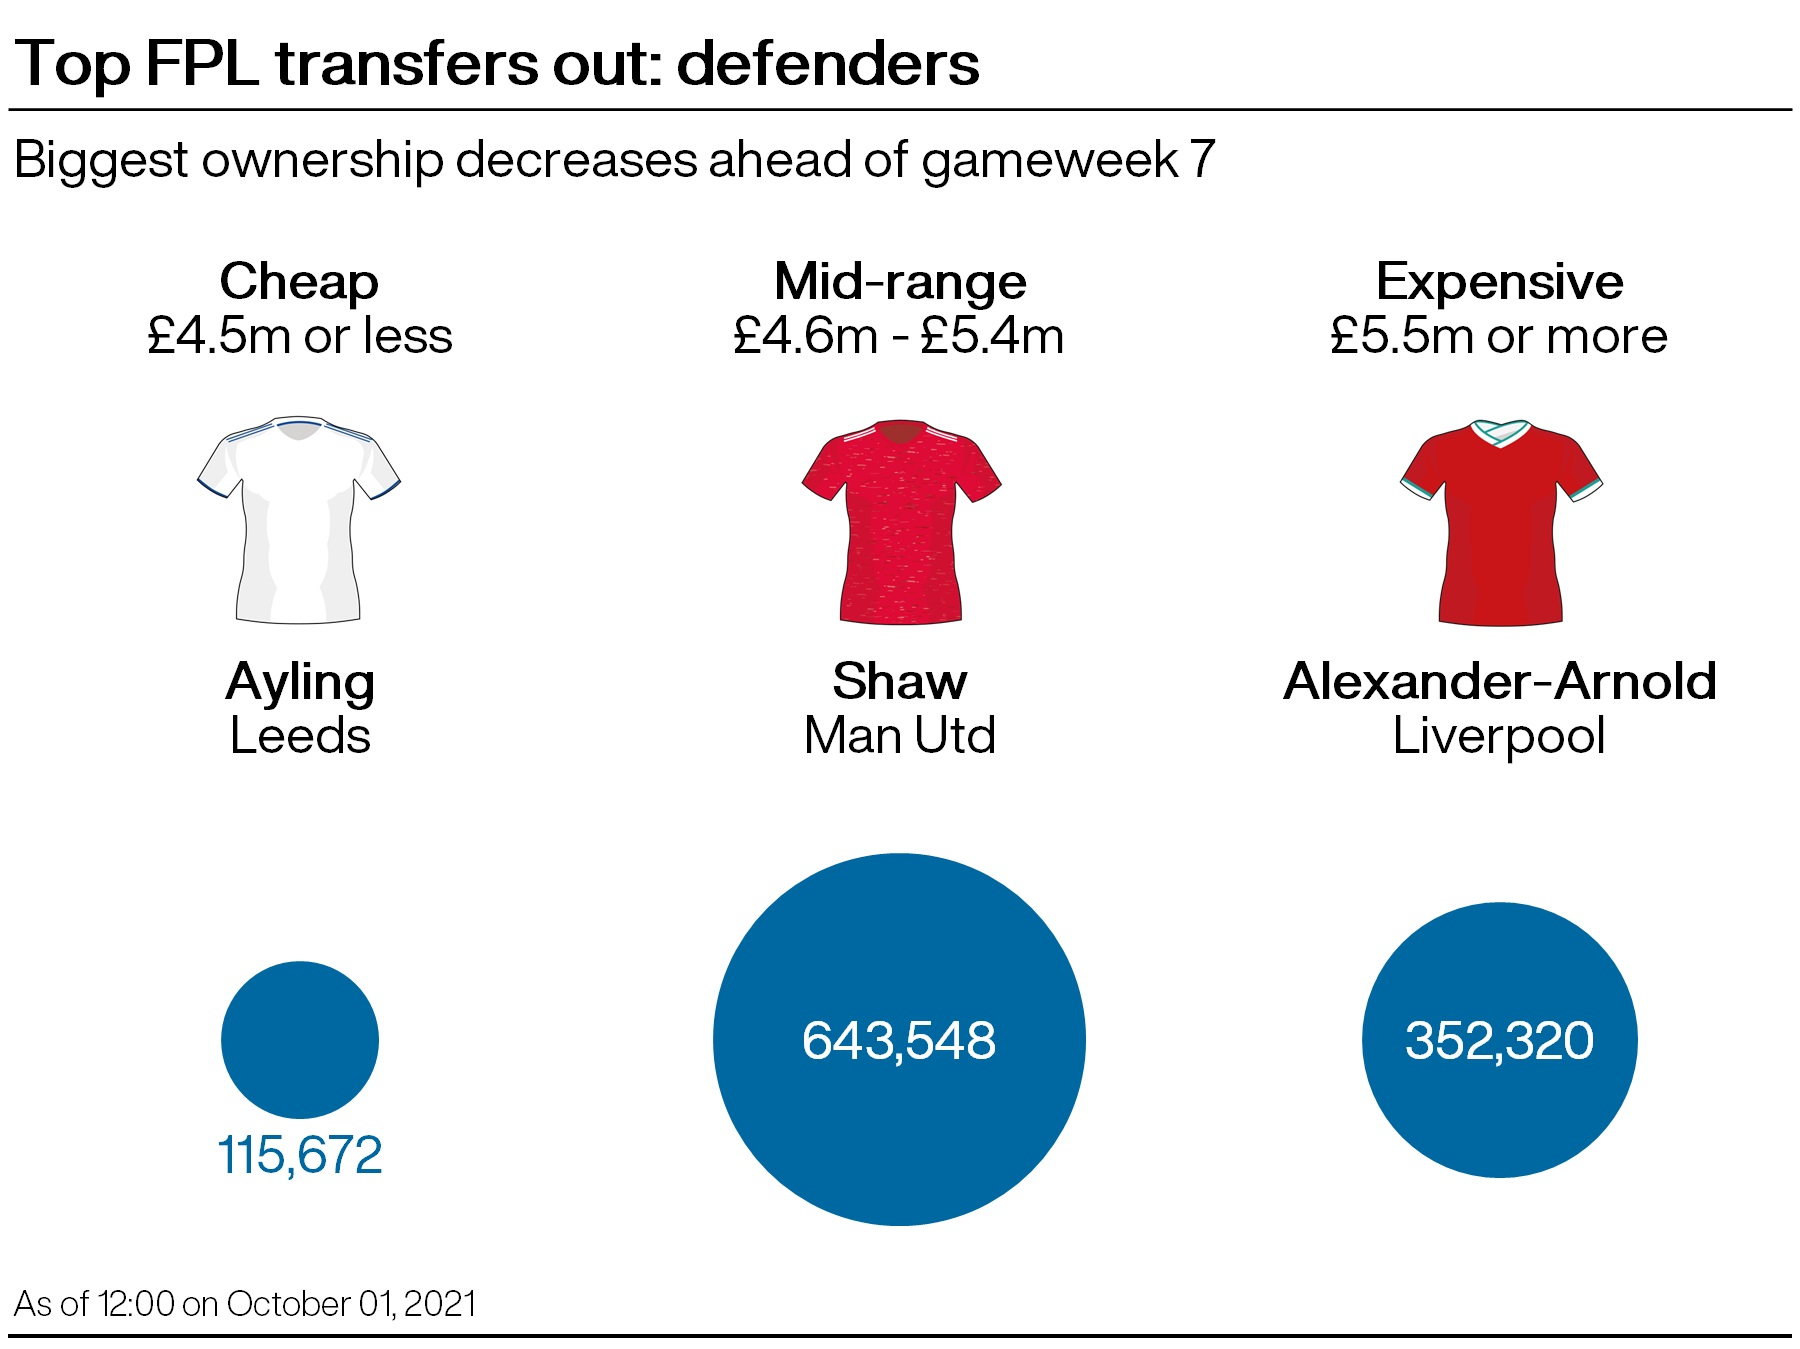 A graphic showing three of the most popular defensive transfers out ahead of gameweek seven of the Fantasy Premier League season